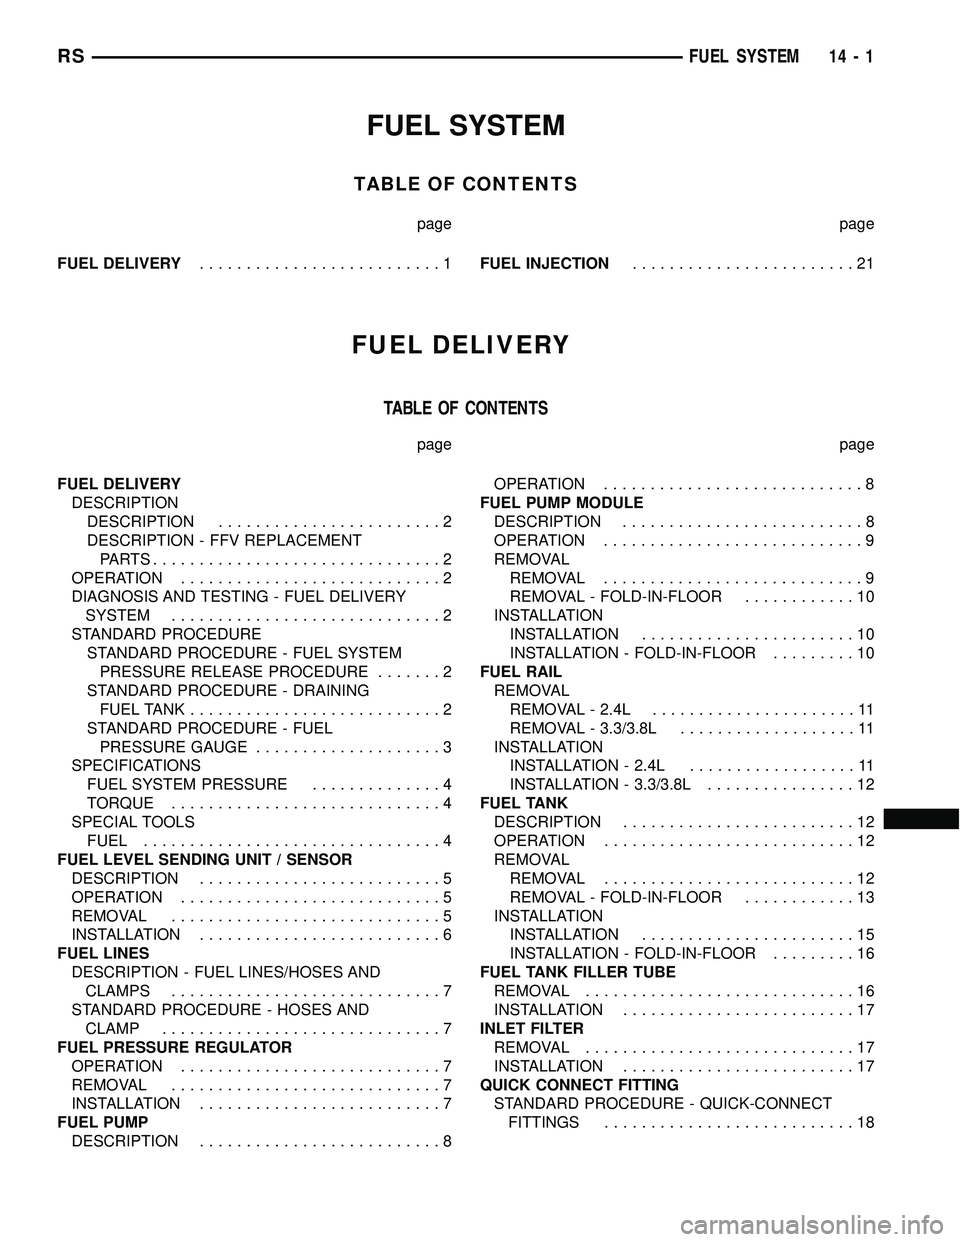 CHRYSLER VOYAGER 2005  Service Manual FUEL SYSTEM
TABLE OF CONTENTS
page page
FUEL DELIVERY..........................1FUEL INJECTION........................21
FUEL DELIVERY
TABLE OF CONTENTS
page page
FUEL DELIVERY
DESCRIPTION
DESCRIPTION